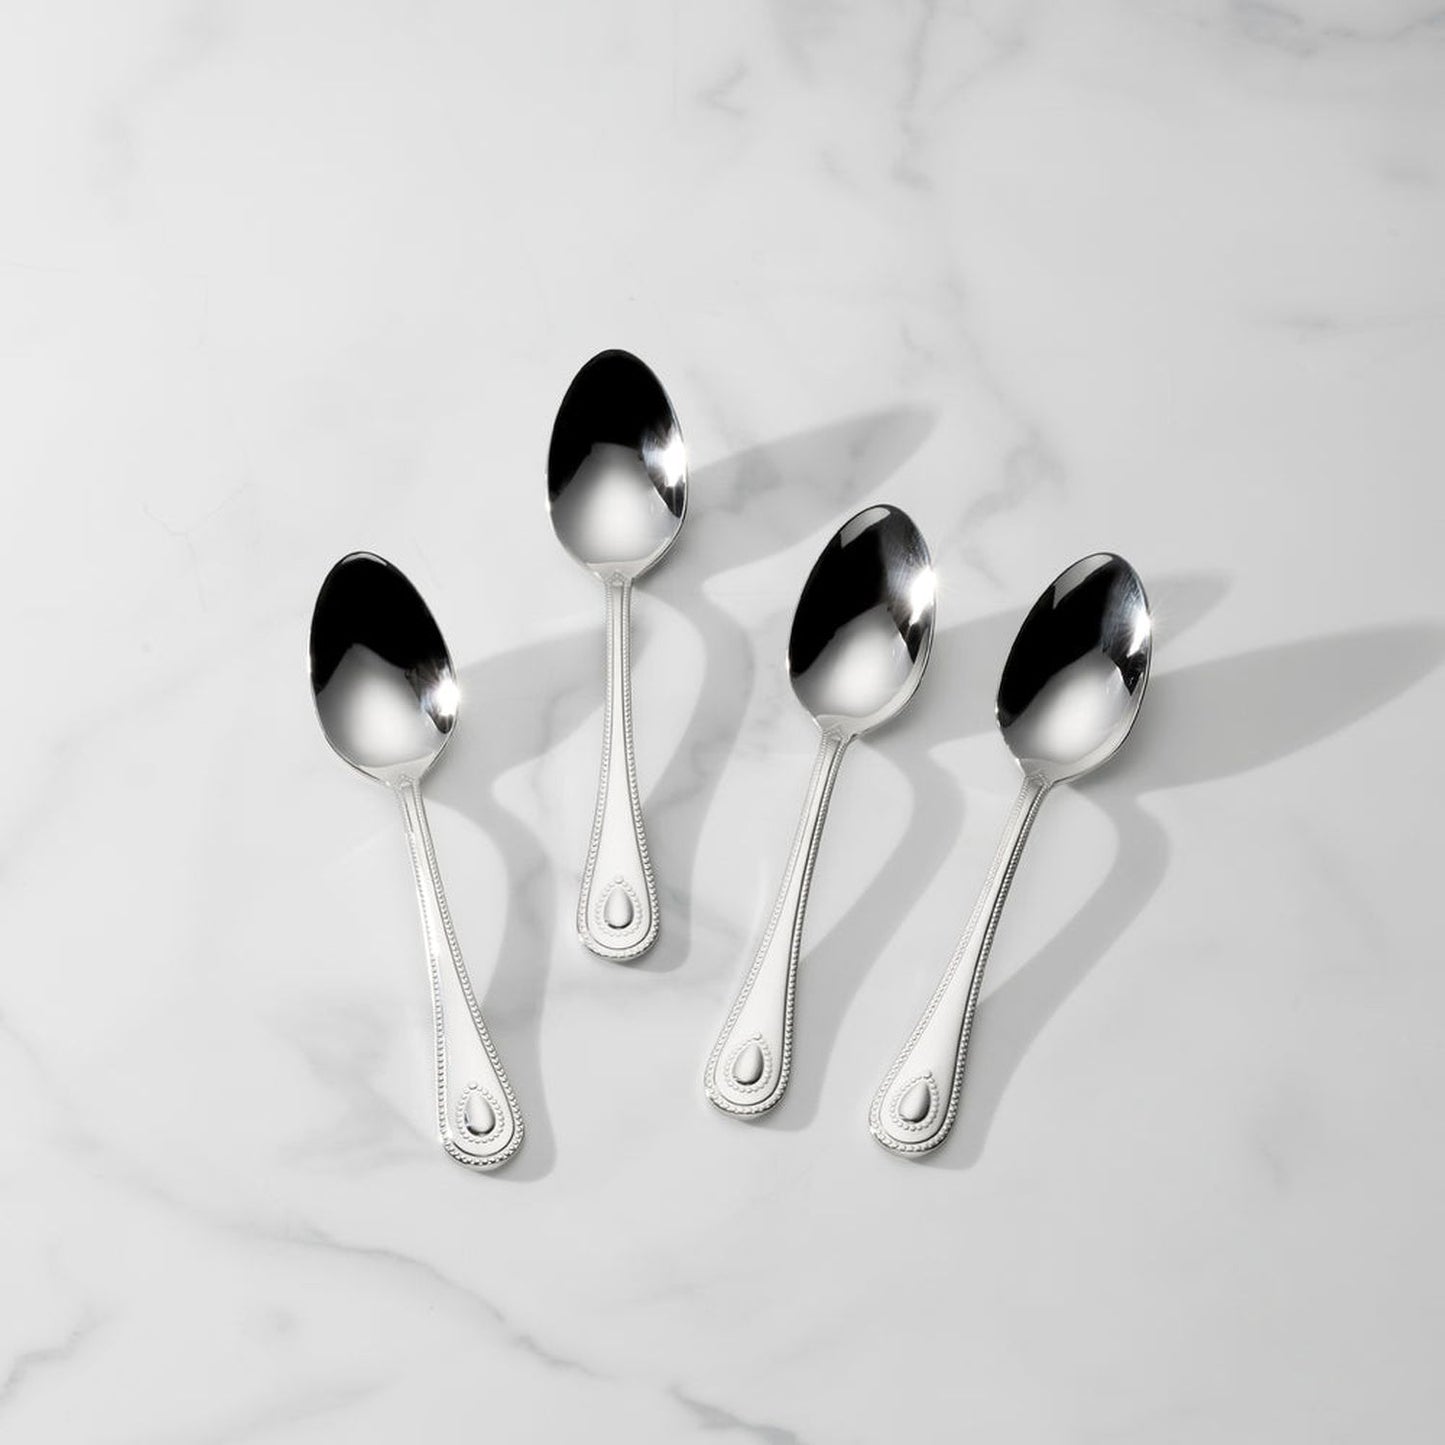 Lenox French Perle Dinner Spoon Set Of 4